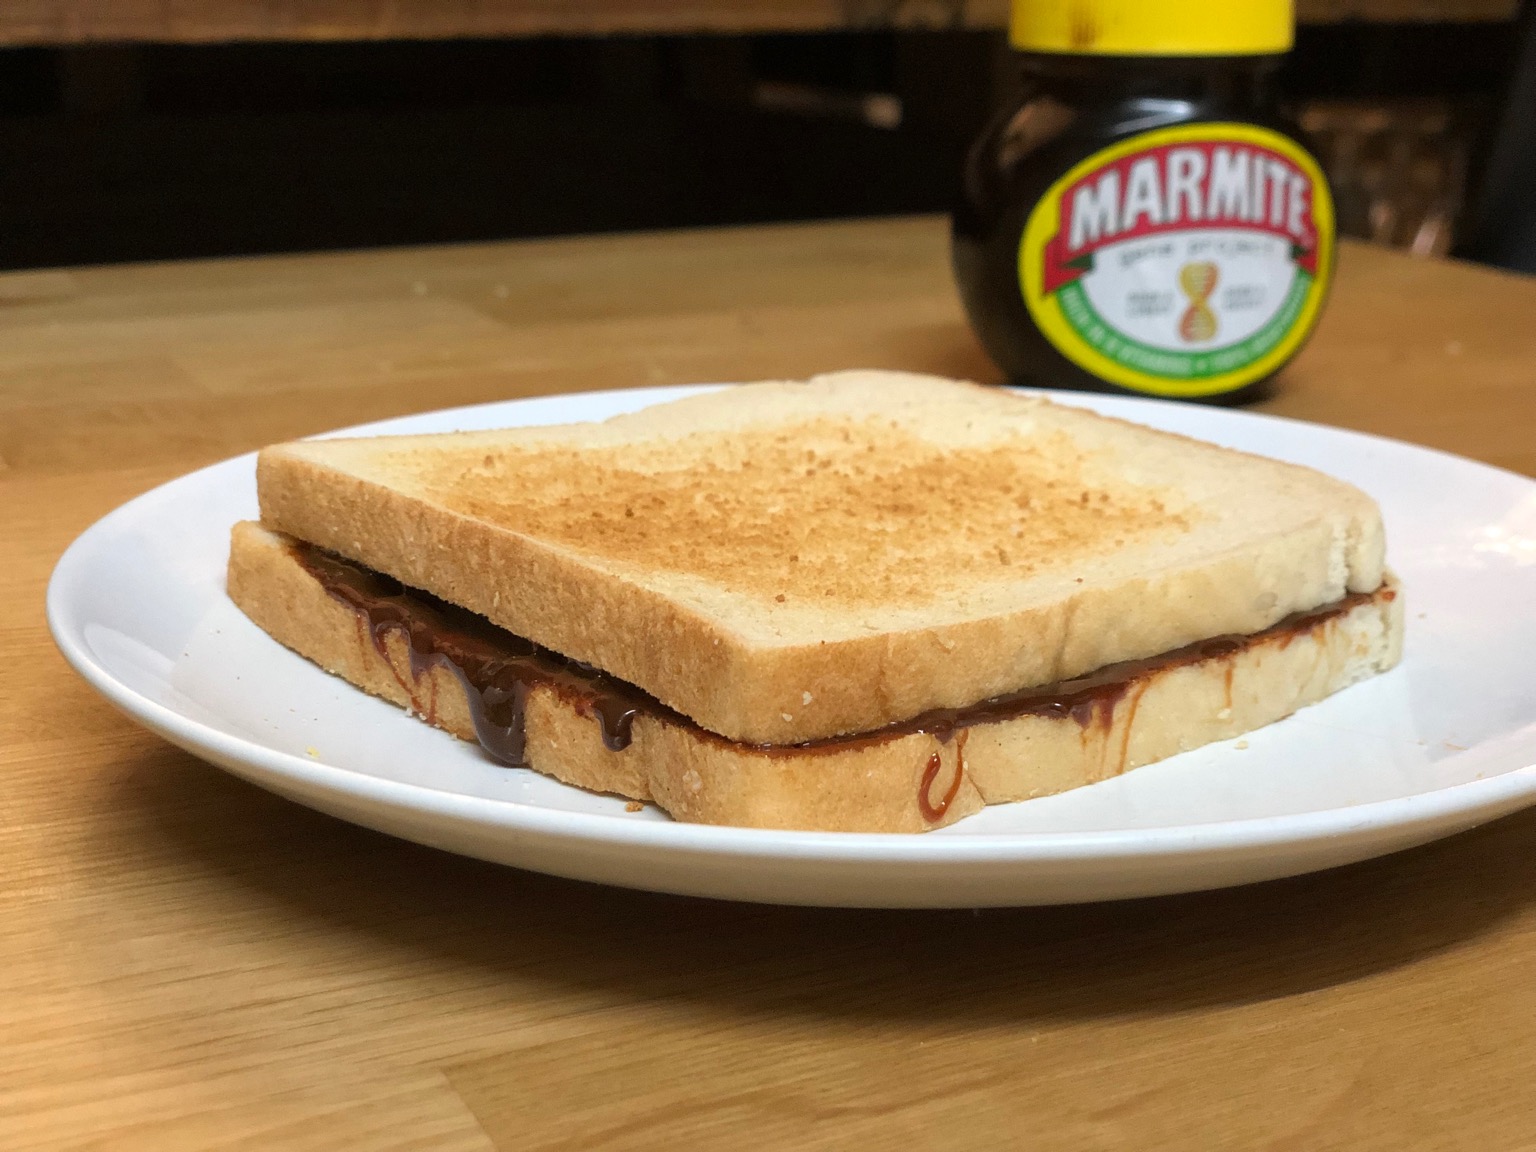 Unknown snacks with Marmite in toasted bread